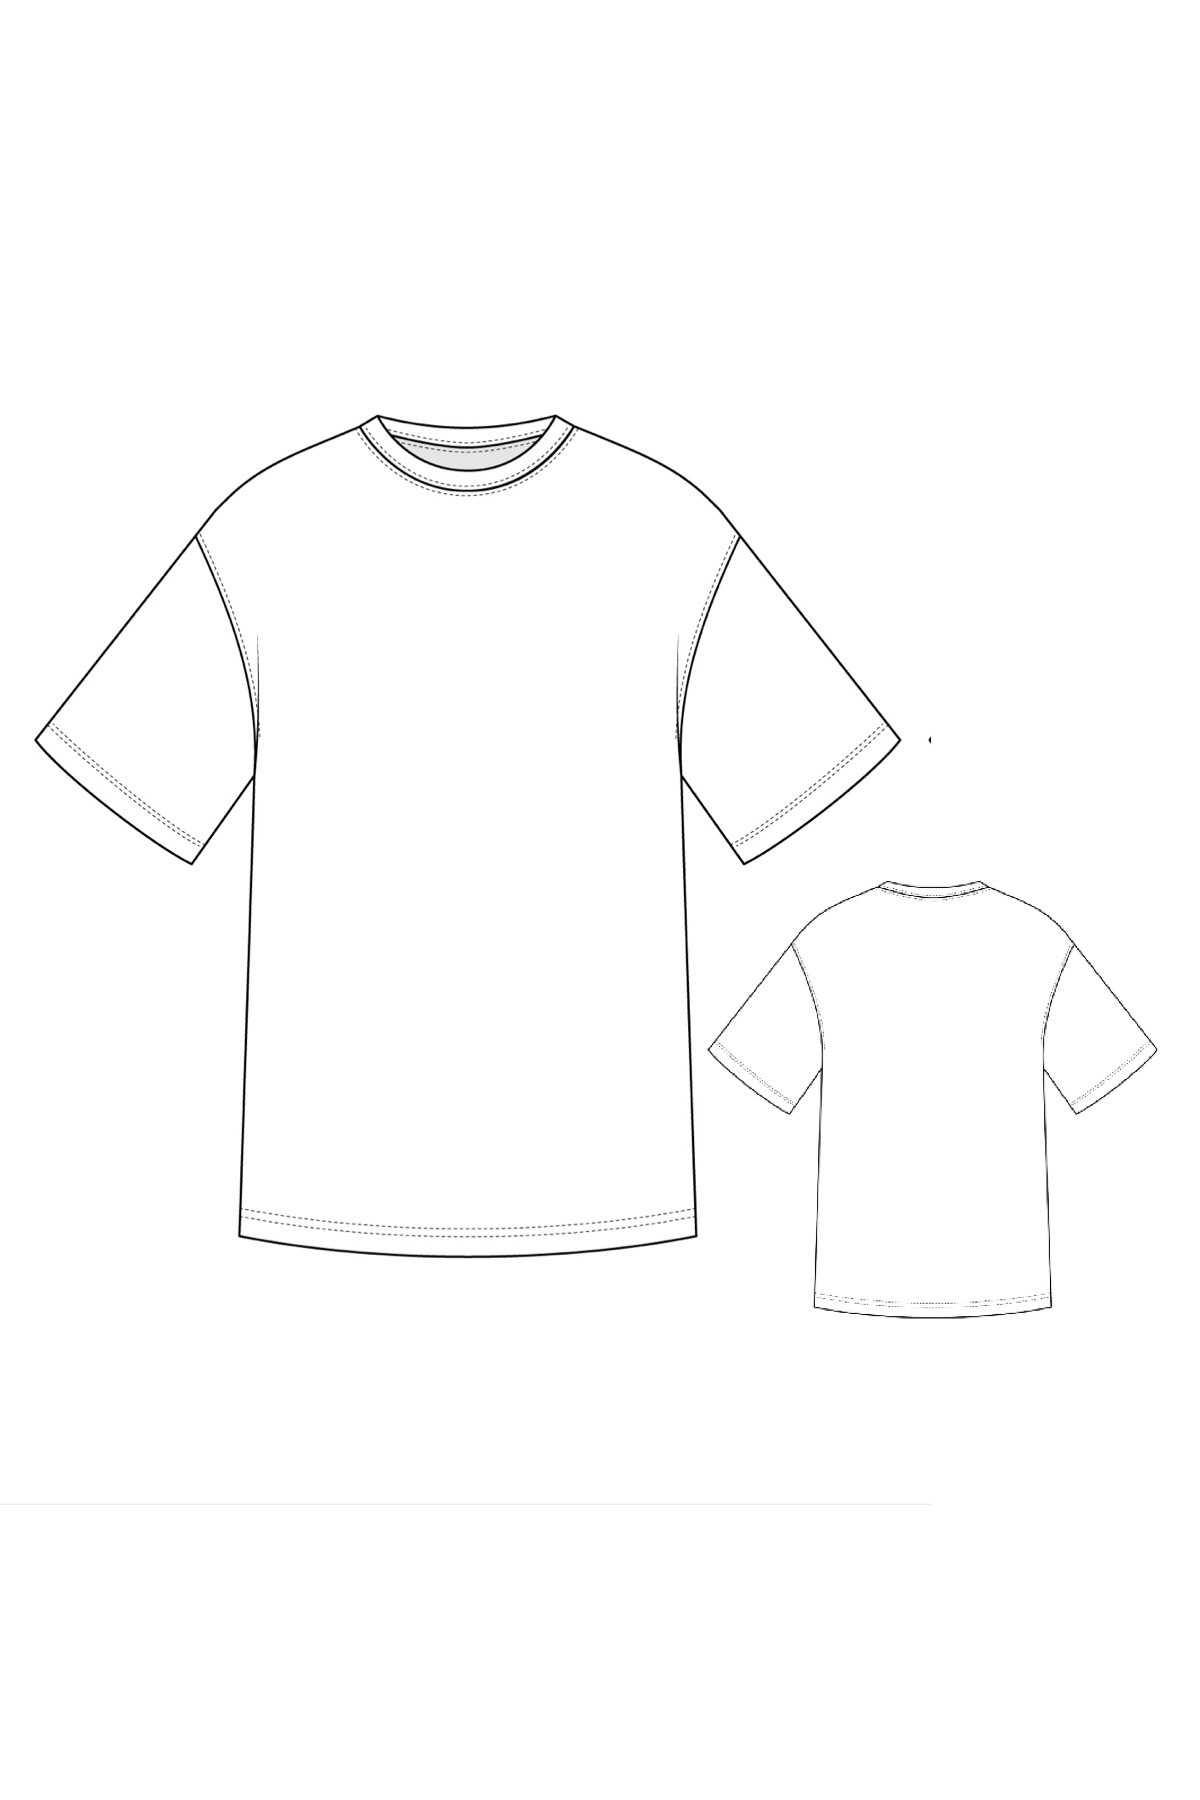 Pattern T-shirt Oversize: buy and download